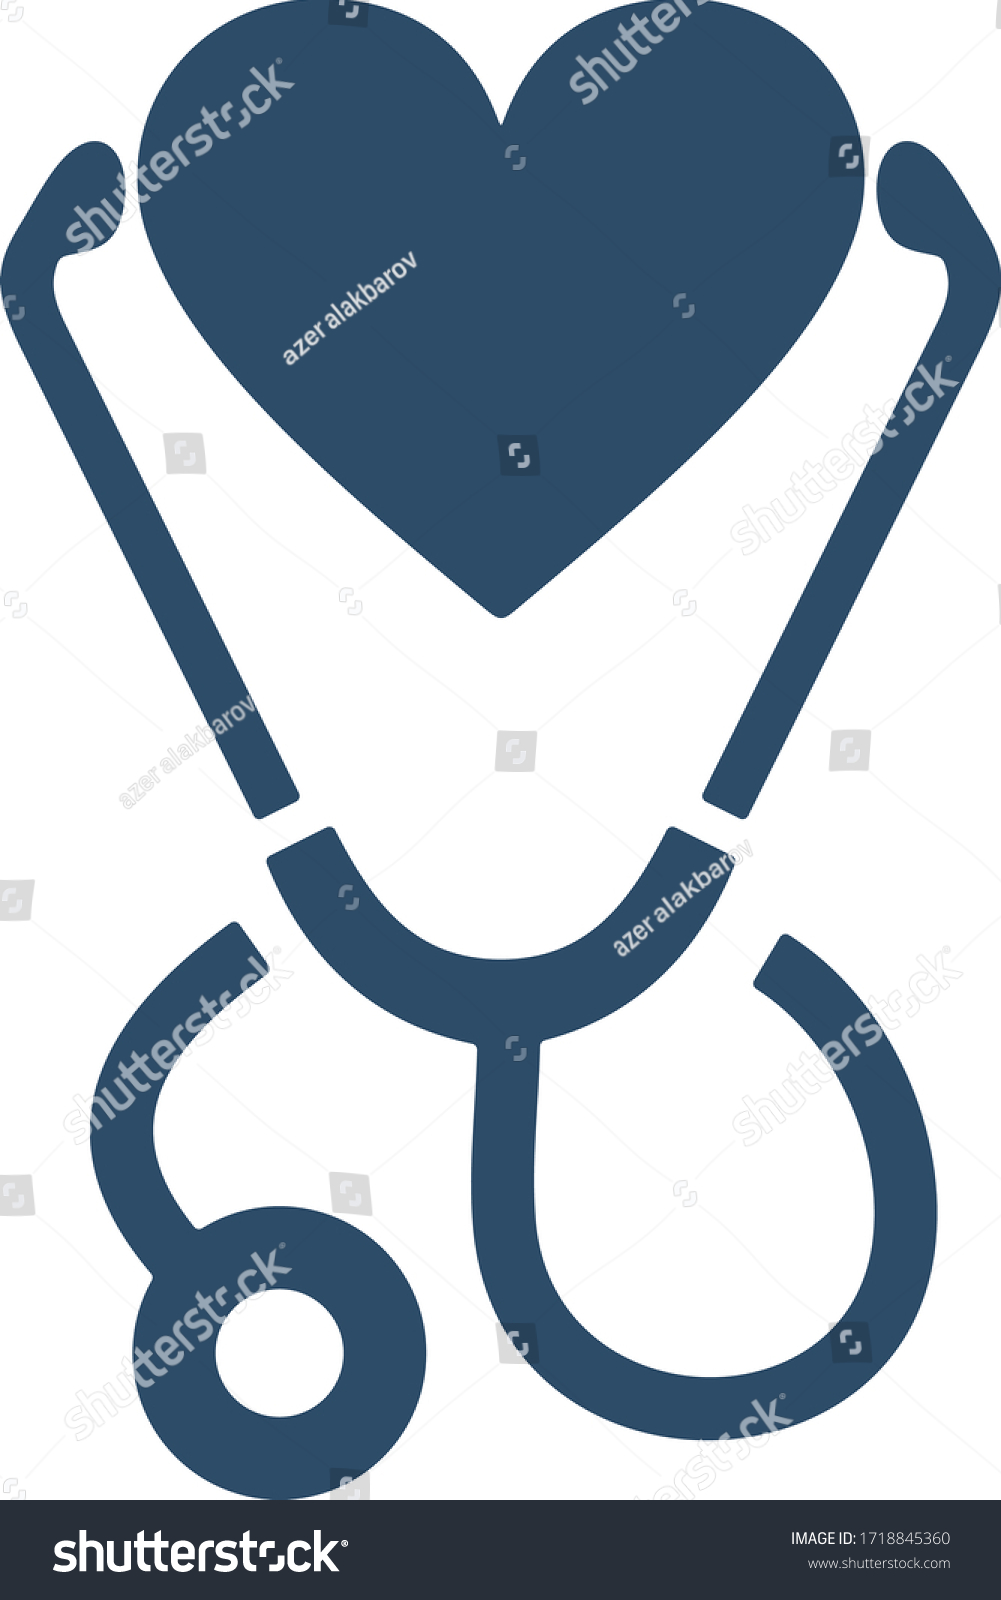 SVG of Stethoscope and heart symbol. Listening heartbeat. Heart rate measurement. Flat icon design for health concept. svg